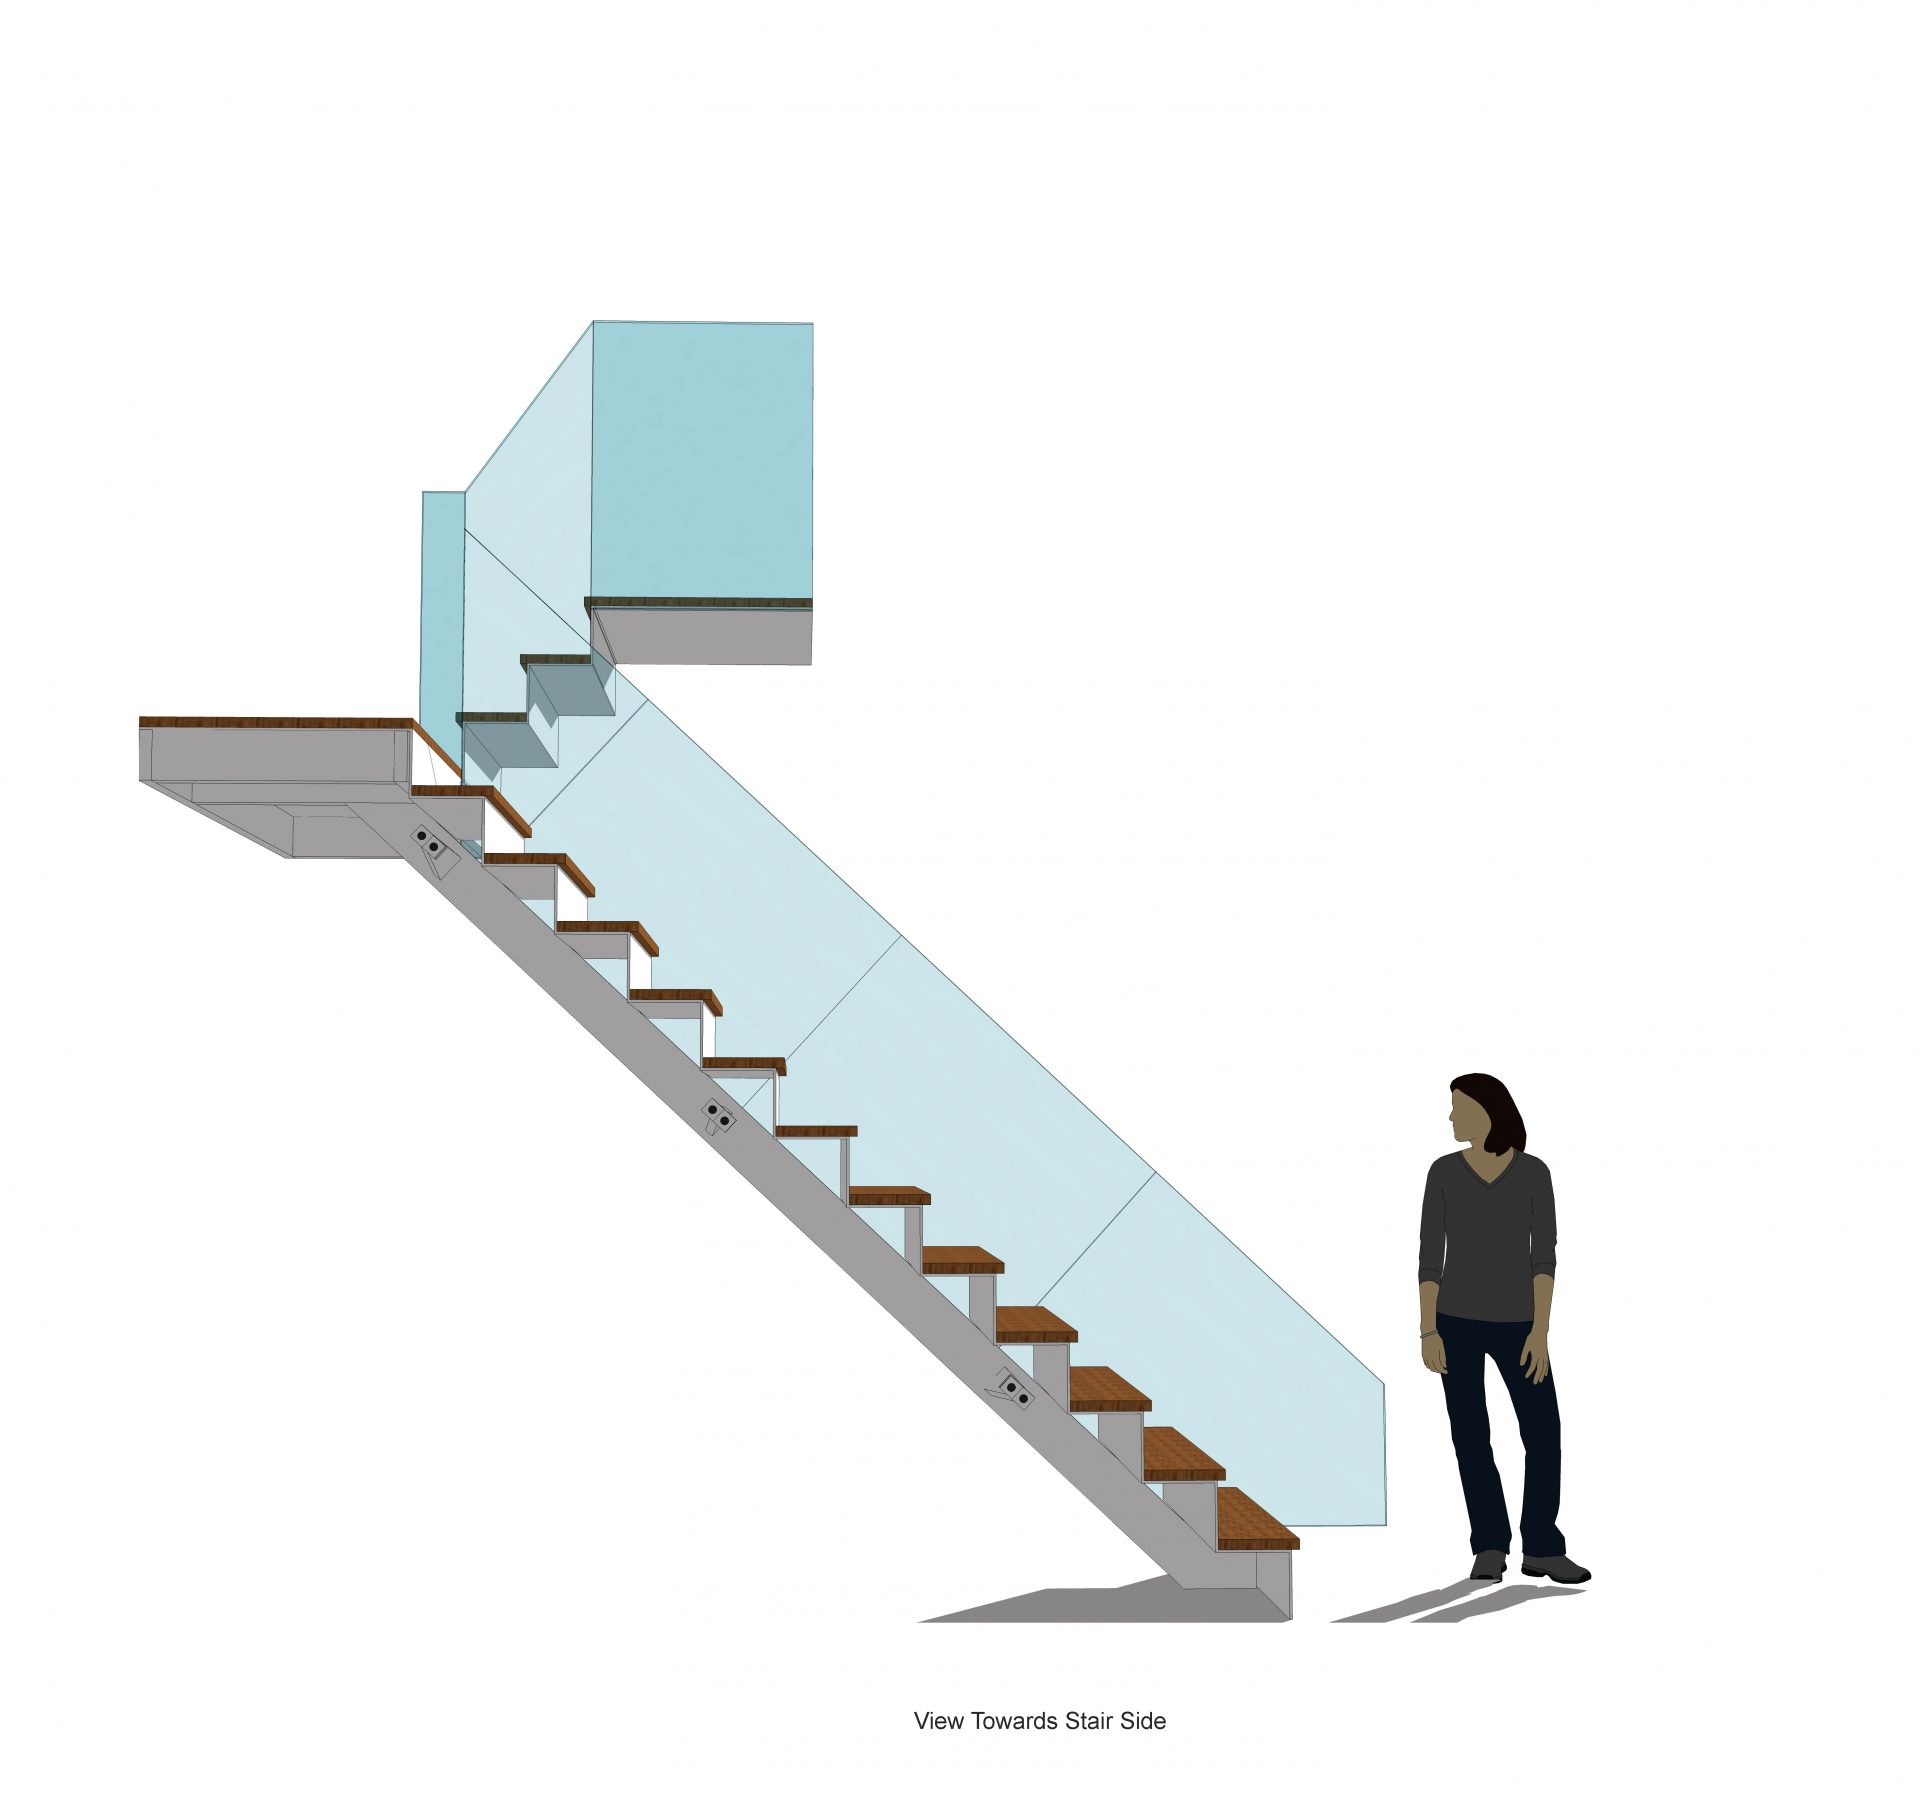 Image showing a 3D model of a staircase